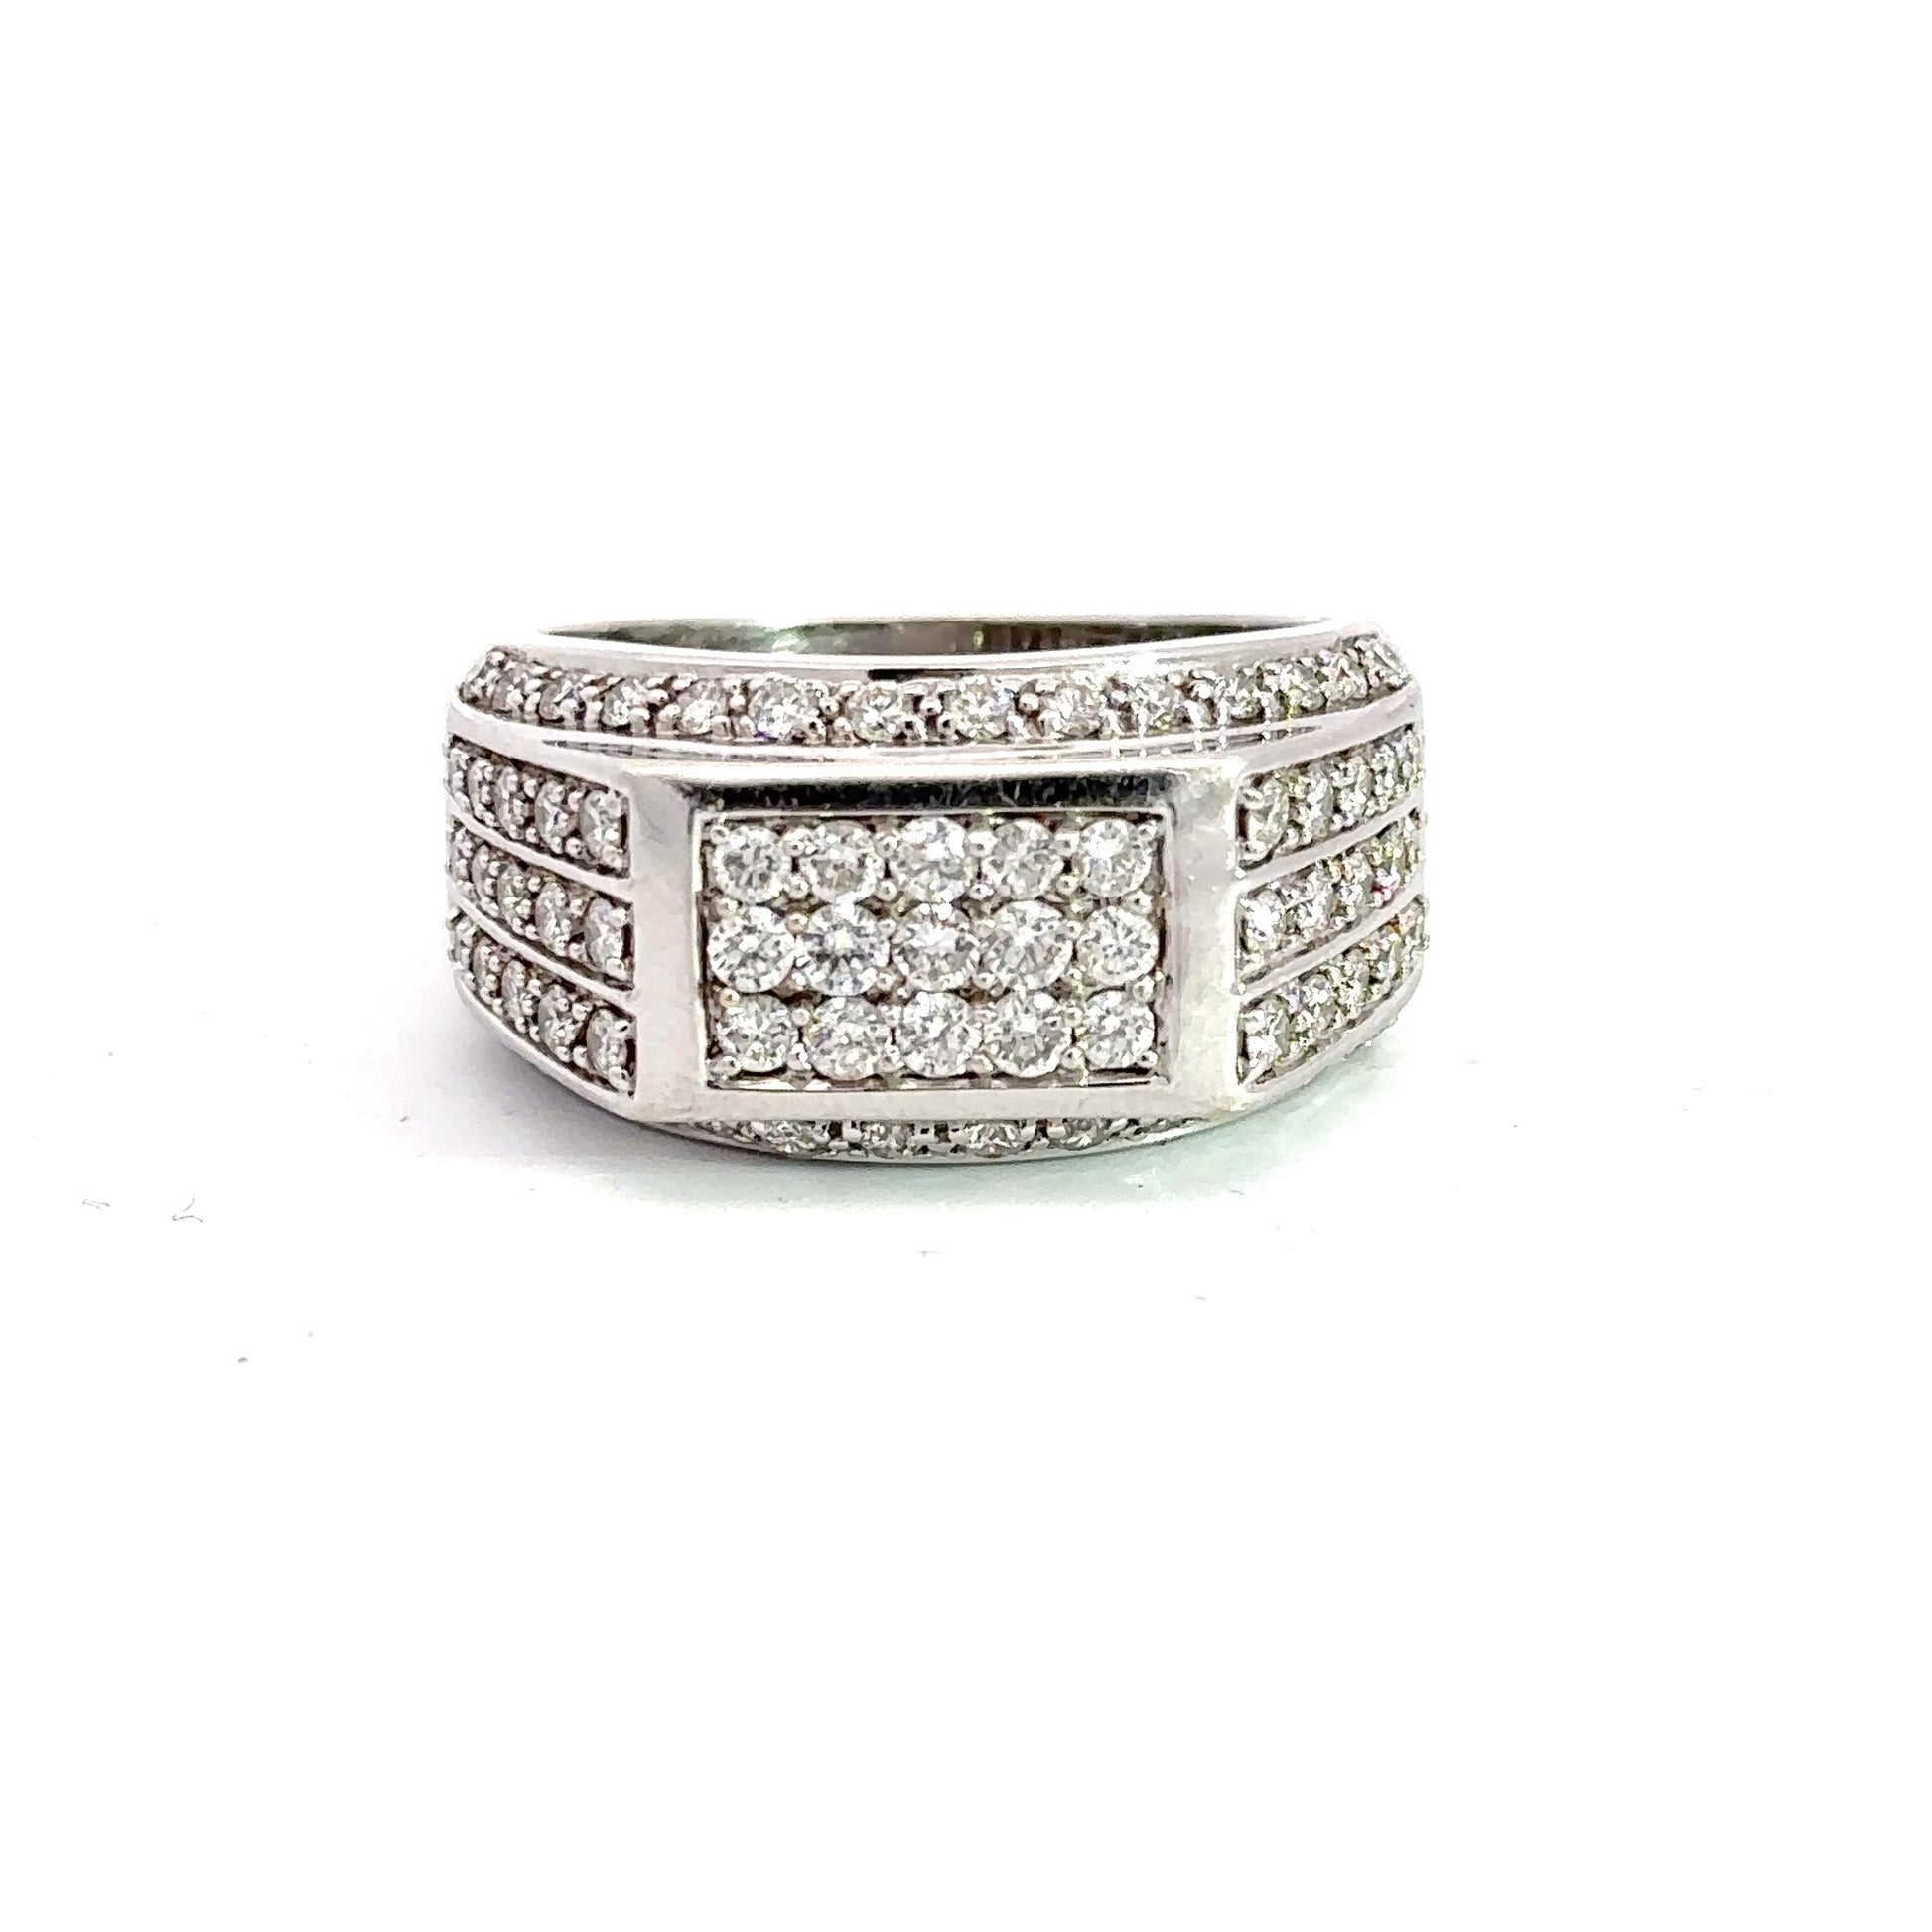 Front of diamond ring with 15 round diamonds in center, diamonds on top and bottom of band, and 3 rows of diamonds on each side